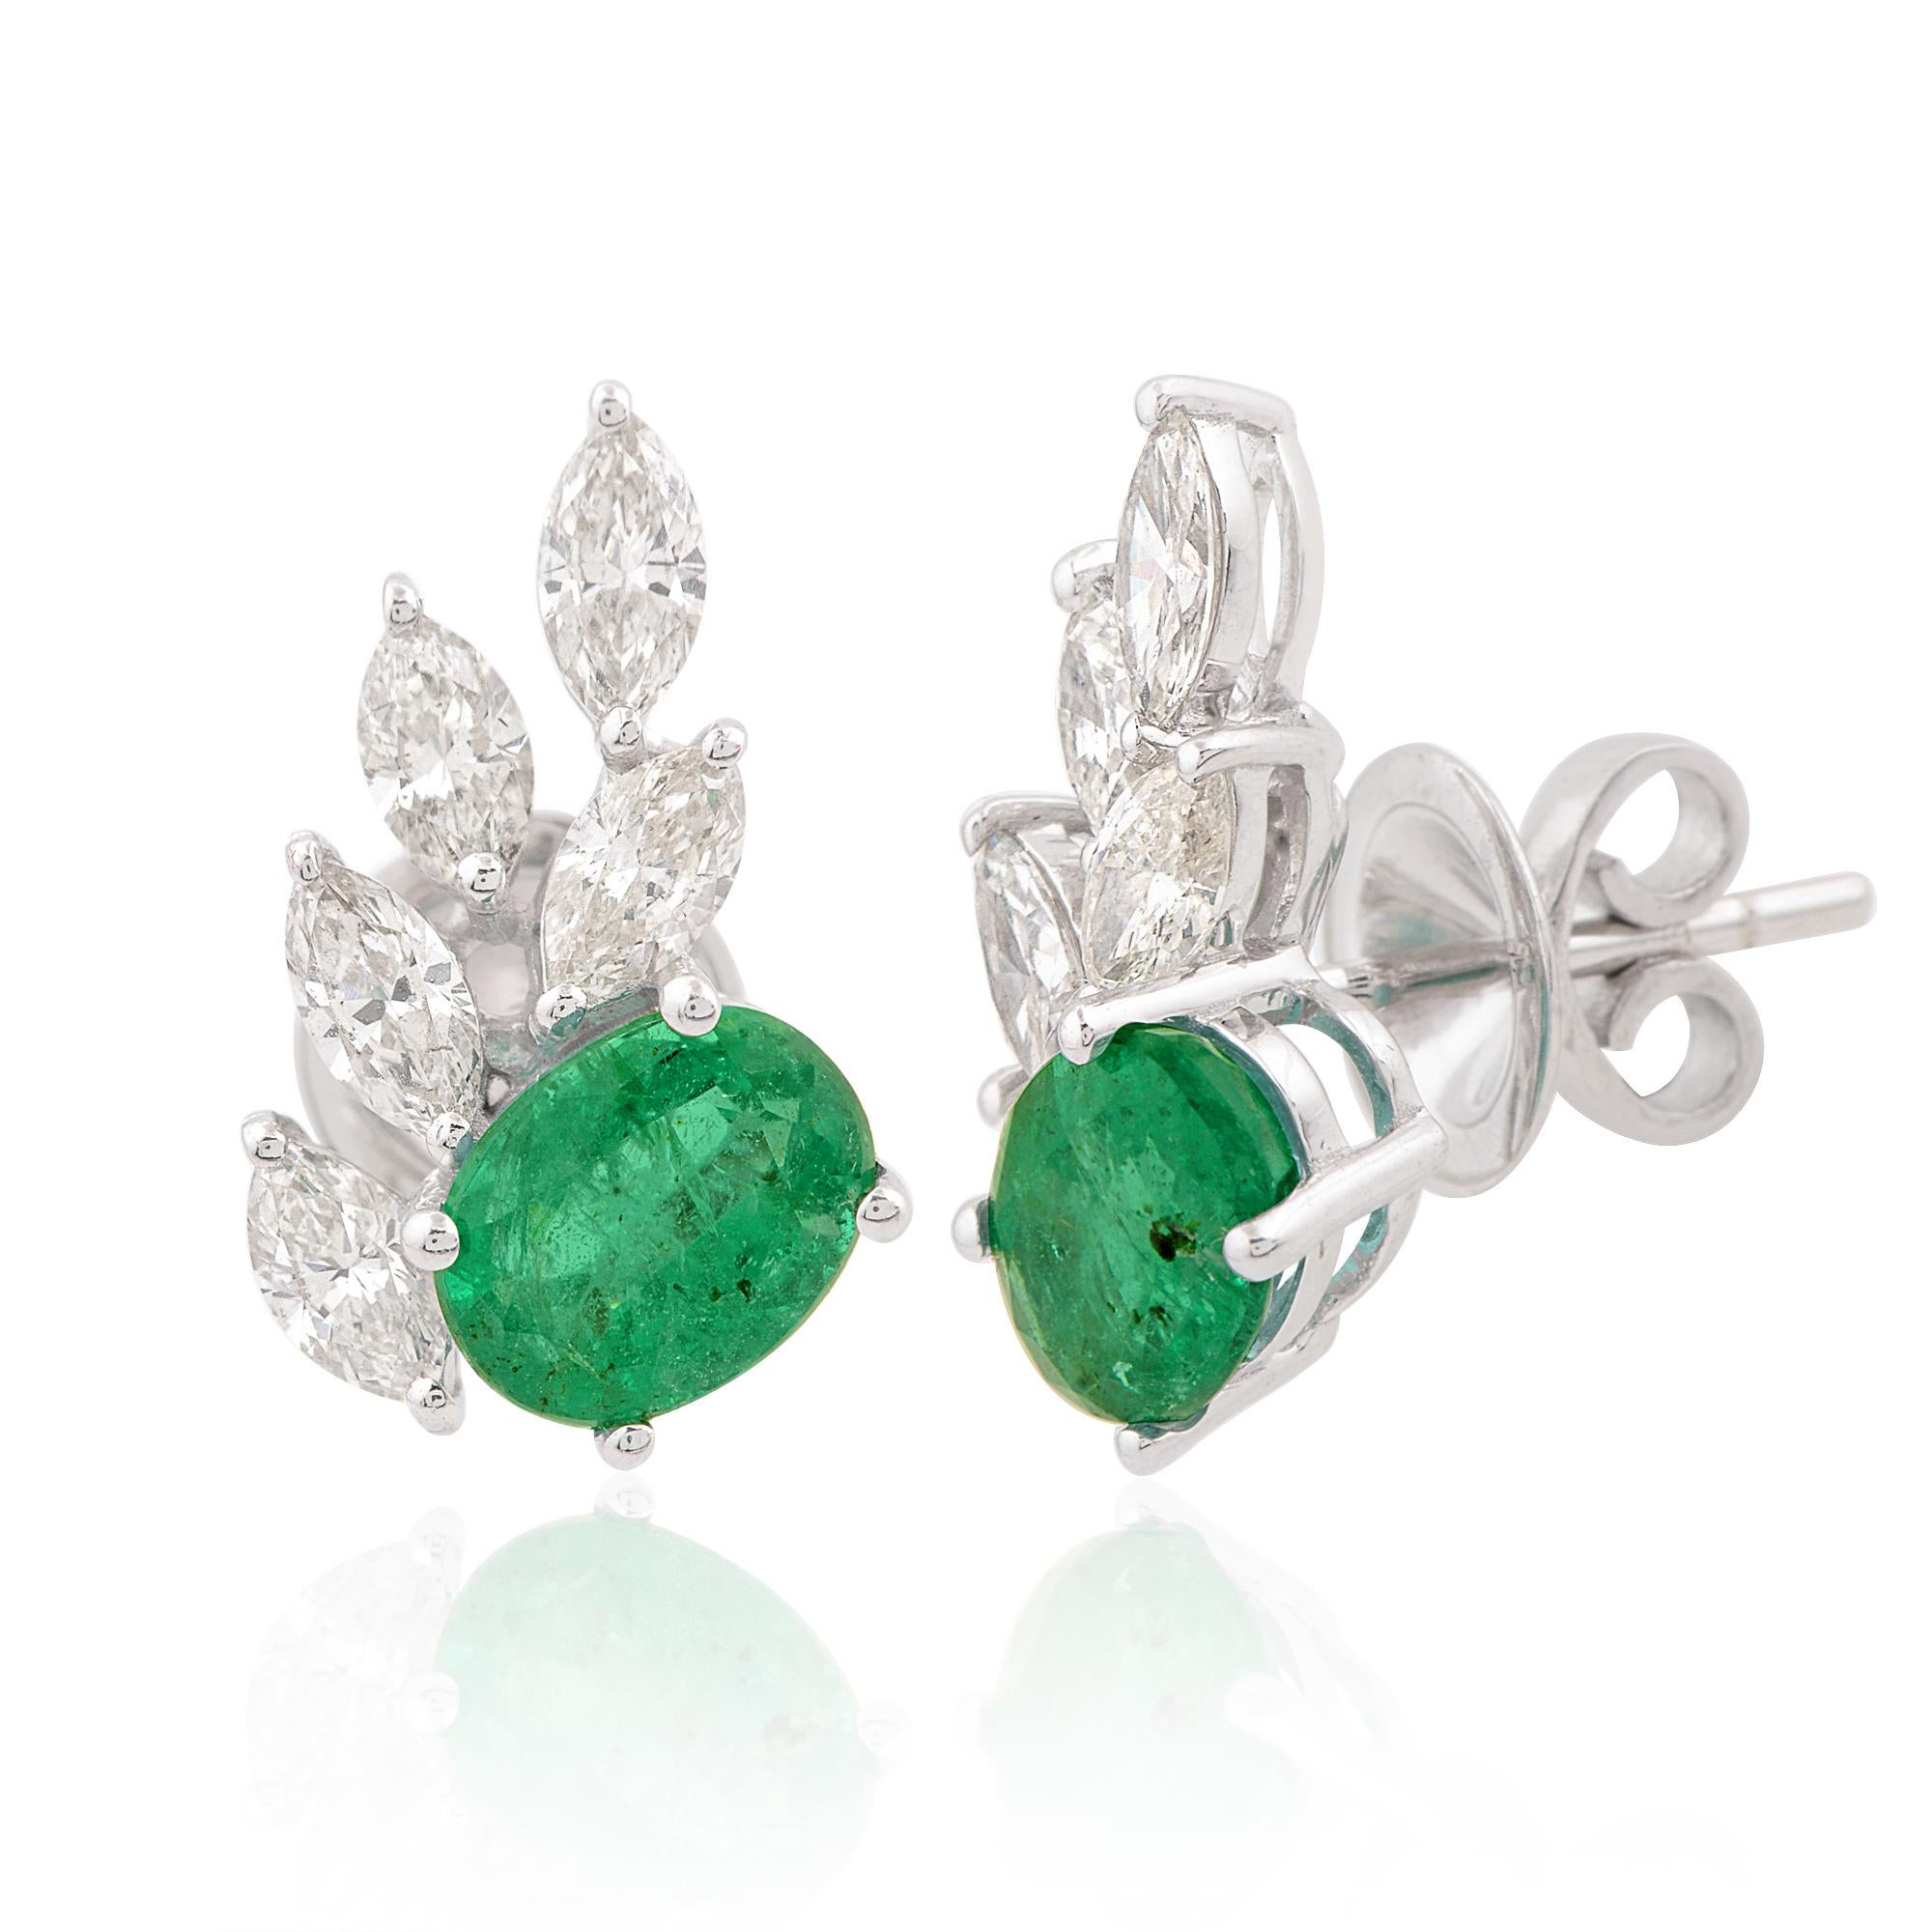 Item Code :- SEE-1118M (14k)
Gross Wet :- 3.34 gm
14k White Gold Wet :- 2.70 gm
Diamond Wet :- 1.24 ct  ( AVERAGE DIAMOND CLARITY SI1-SI2 & COLOR H-I )
Emerald Wet :- 1.96 ct
Earrings Size :- 17x12 mm approx.

✦ Sizing
.....................
We can